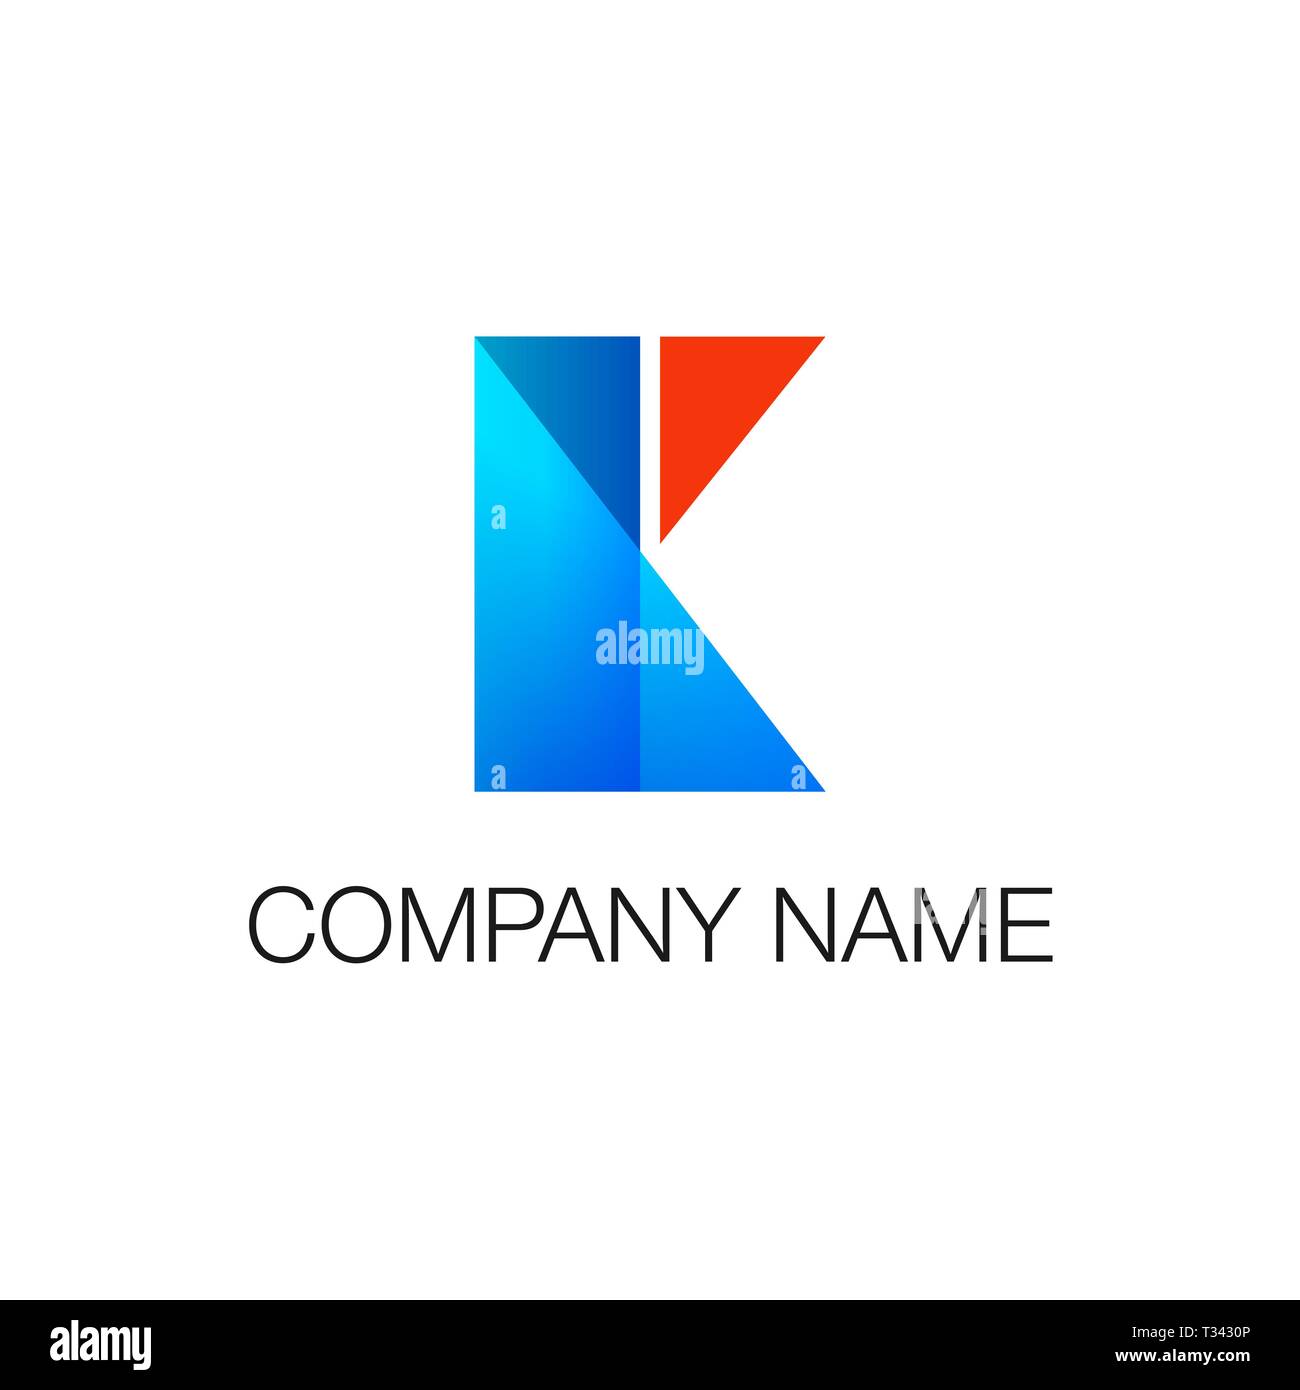 Logotype Geometric Shapes Rectangle And Triangle Blue And Red